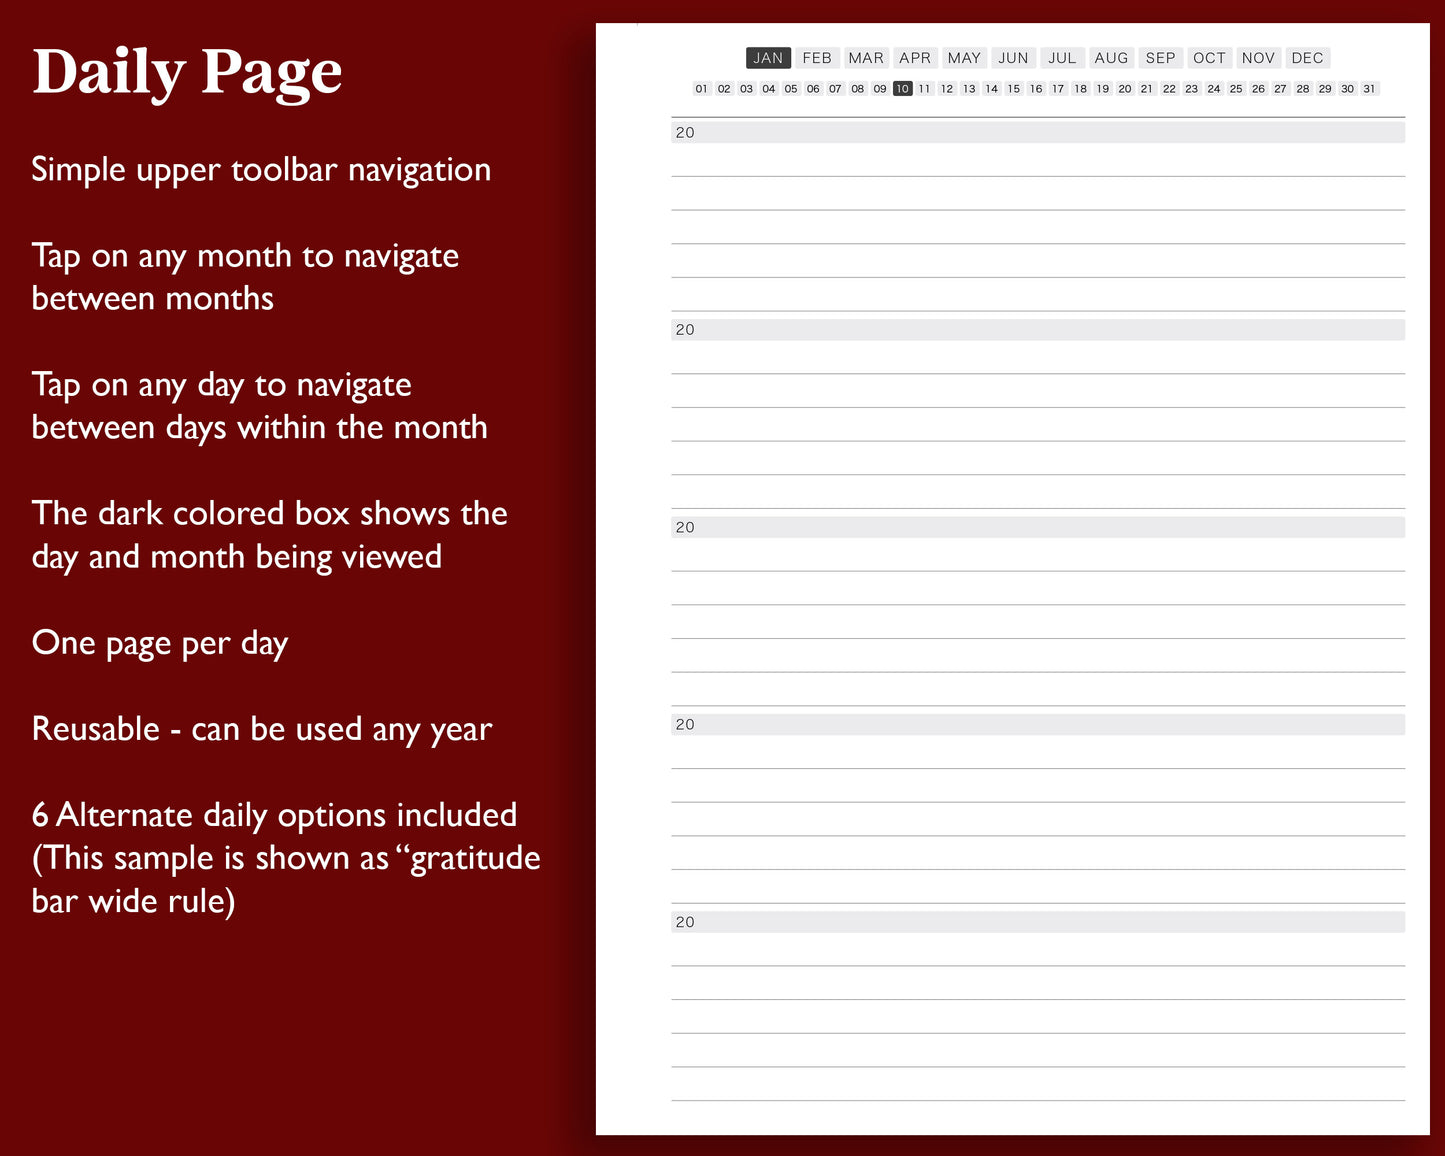 5 Year Daily Journal | for Kindle Scribe